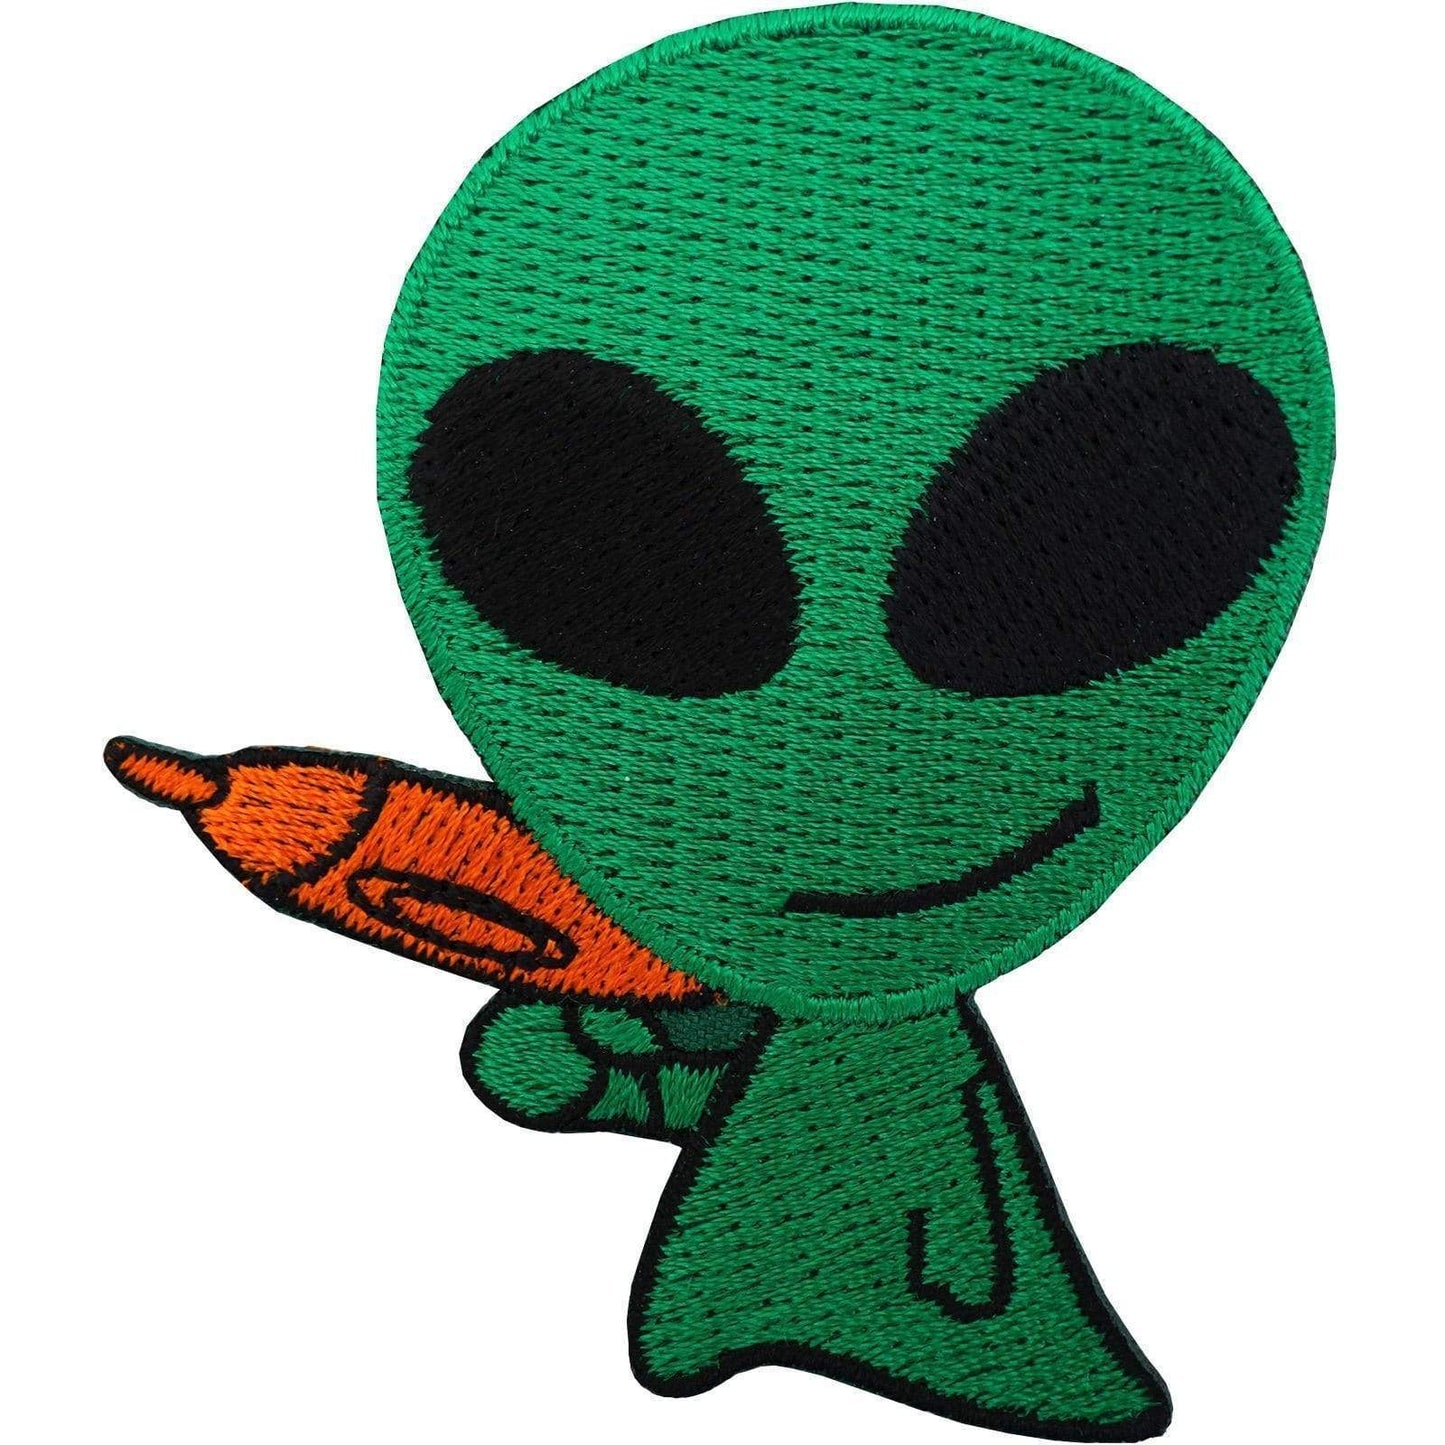 Alien Patch Sew / Iron On Embroidered T Shirt Badge UFO Space Gun Martian NASA